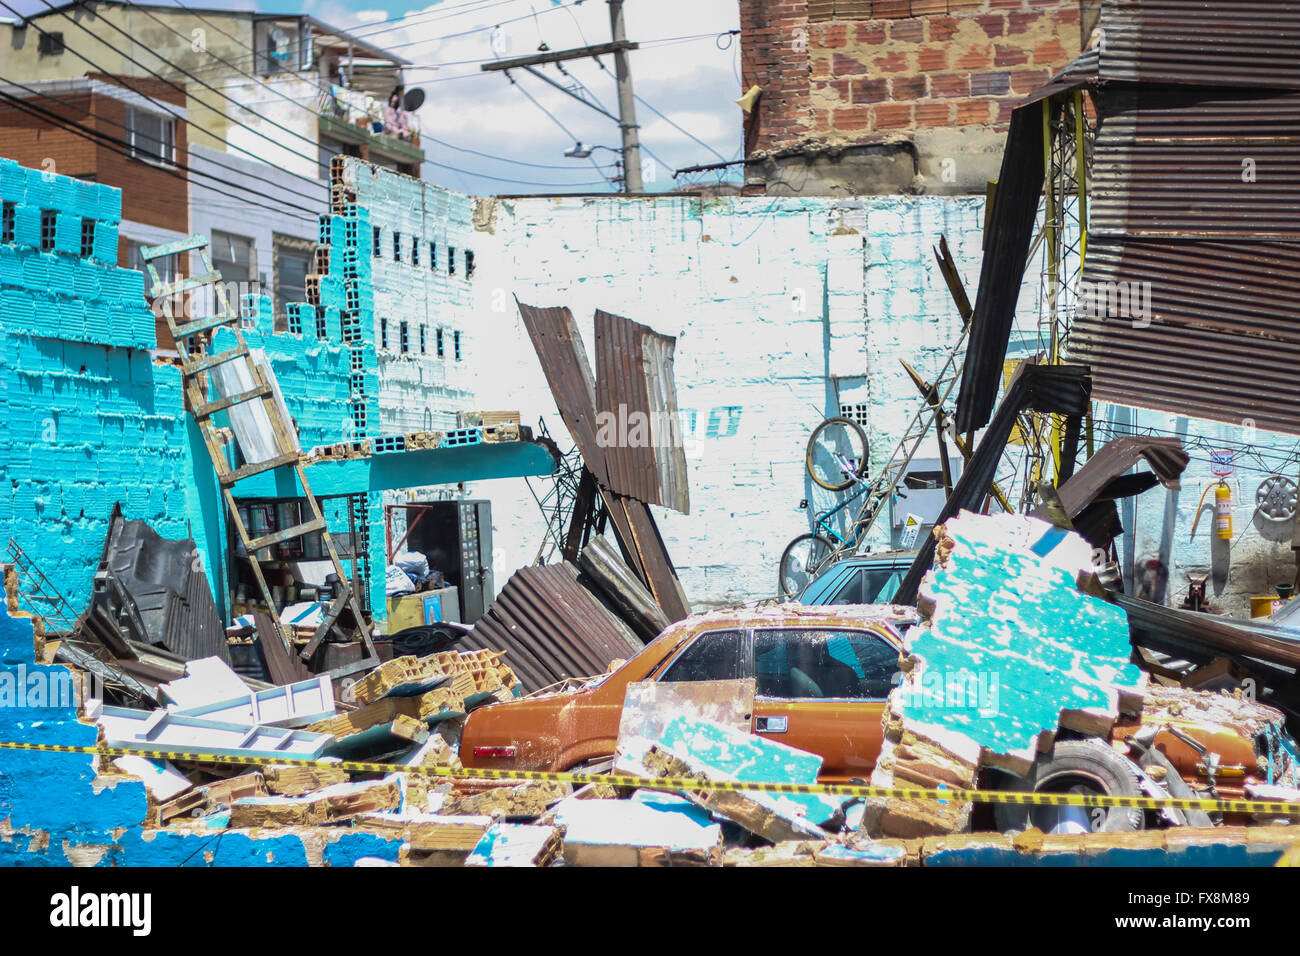 Destroyed building after hailstorm Stock Photo